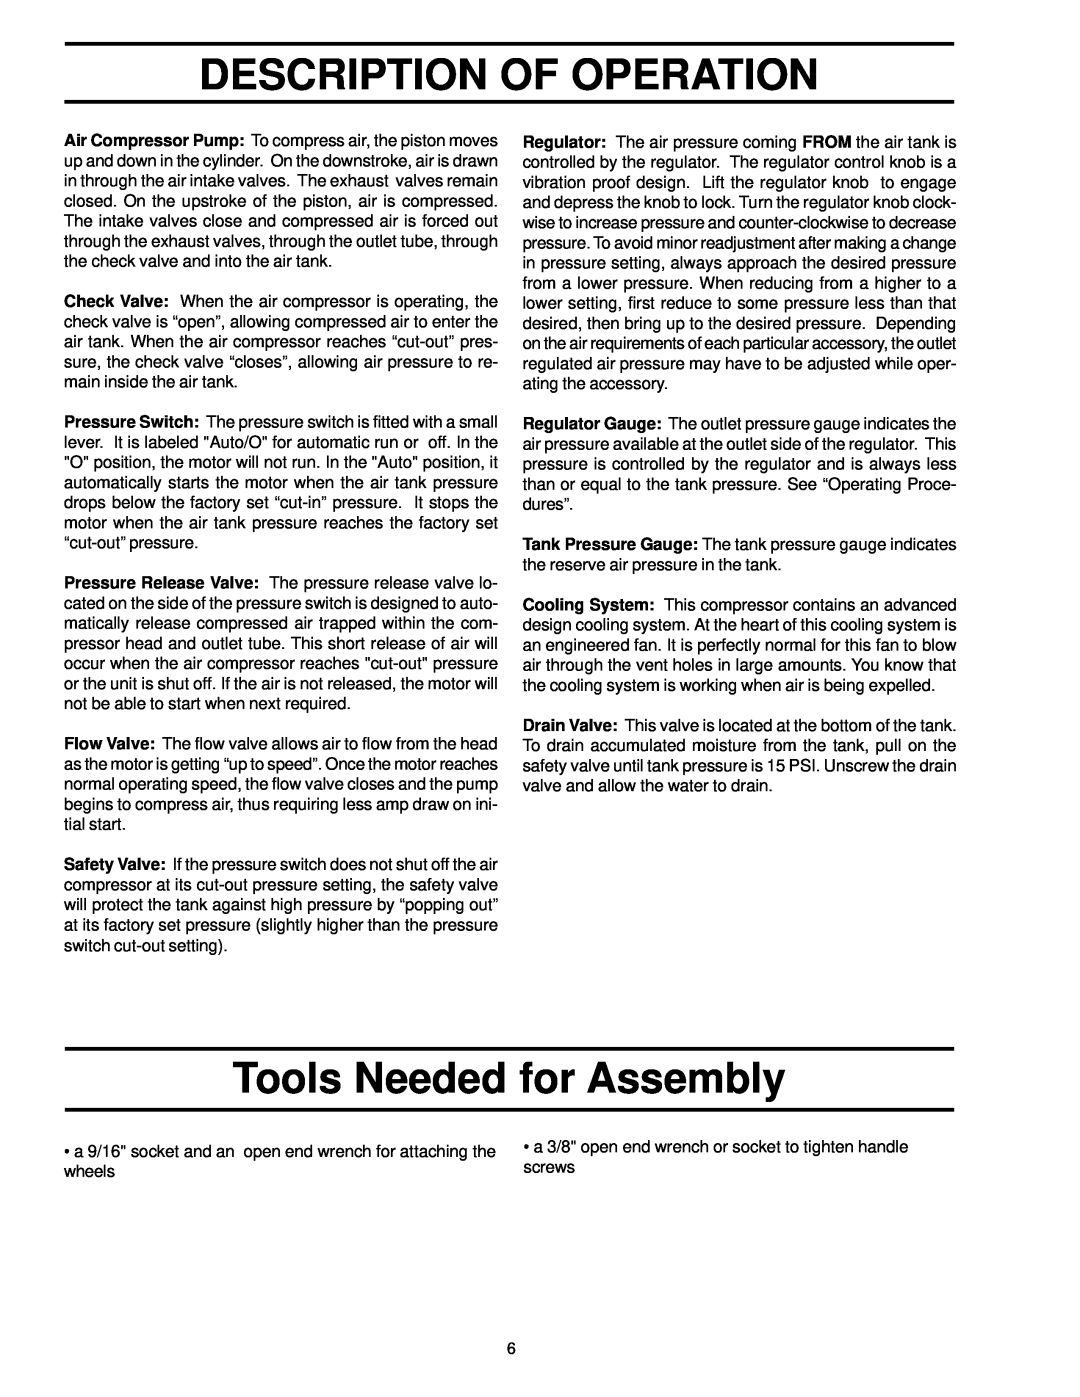 Sears 919.72512 owner manual Description Of Operation, Tools Needed for Assembly 